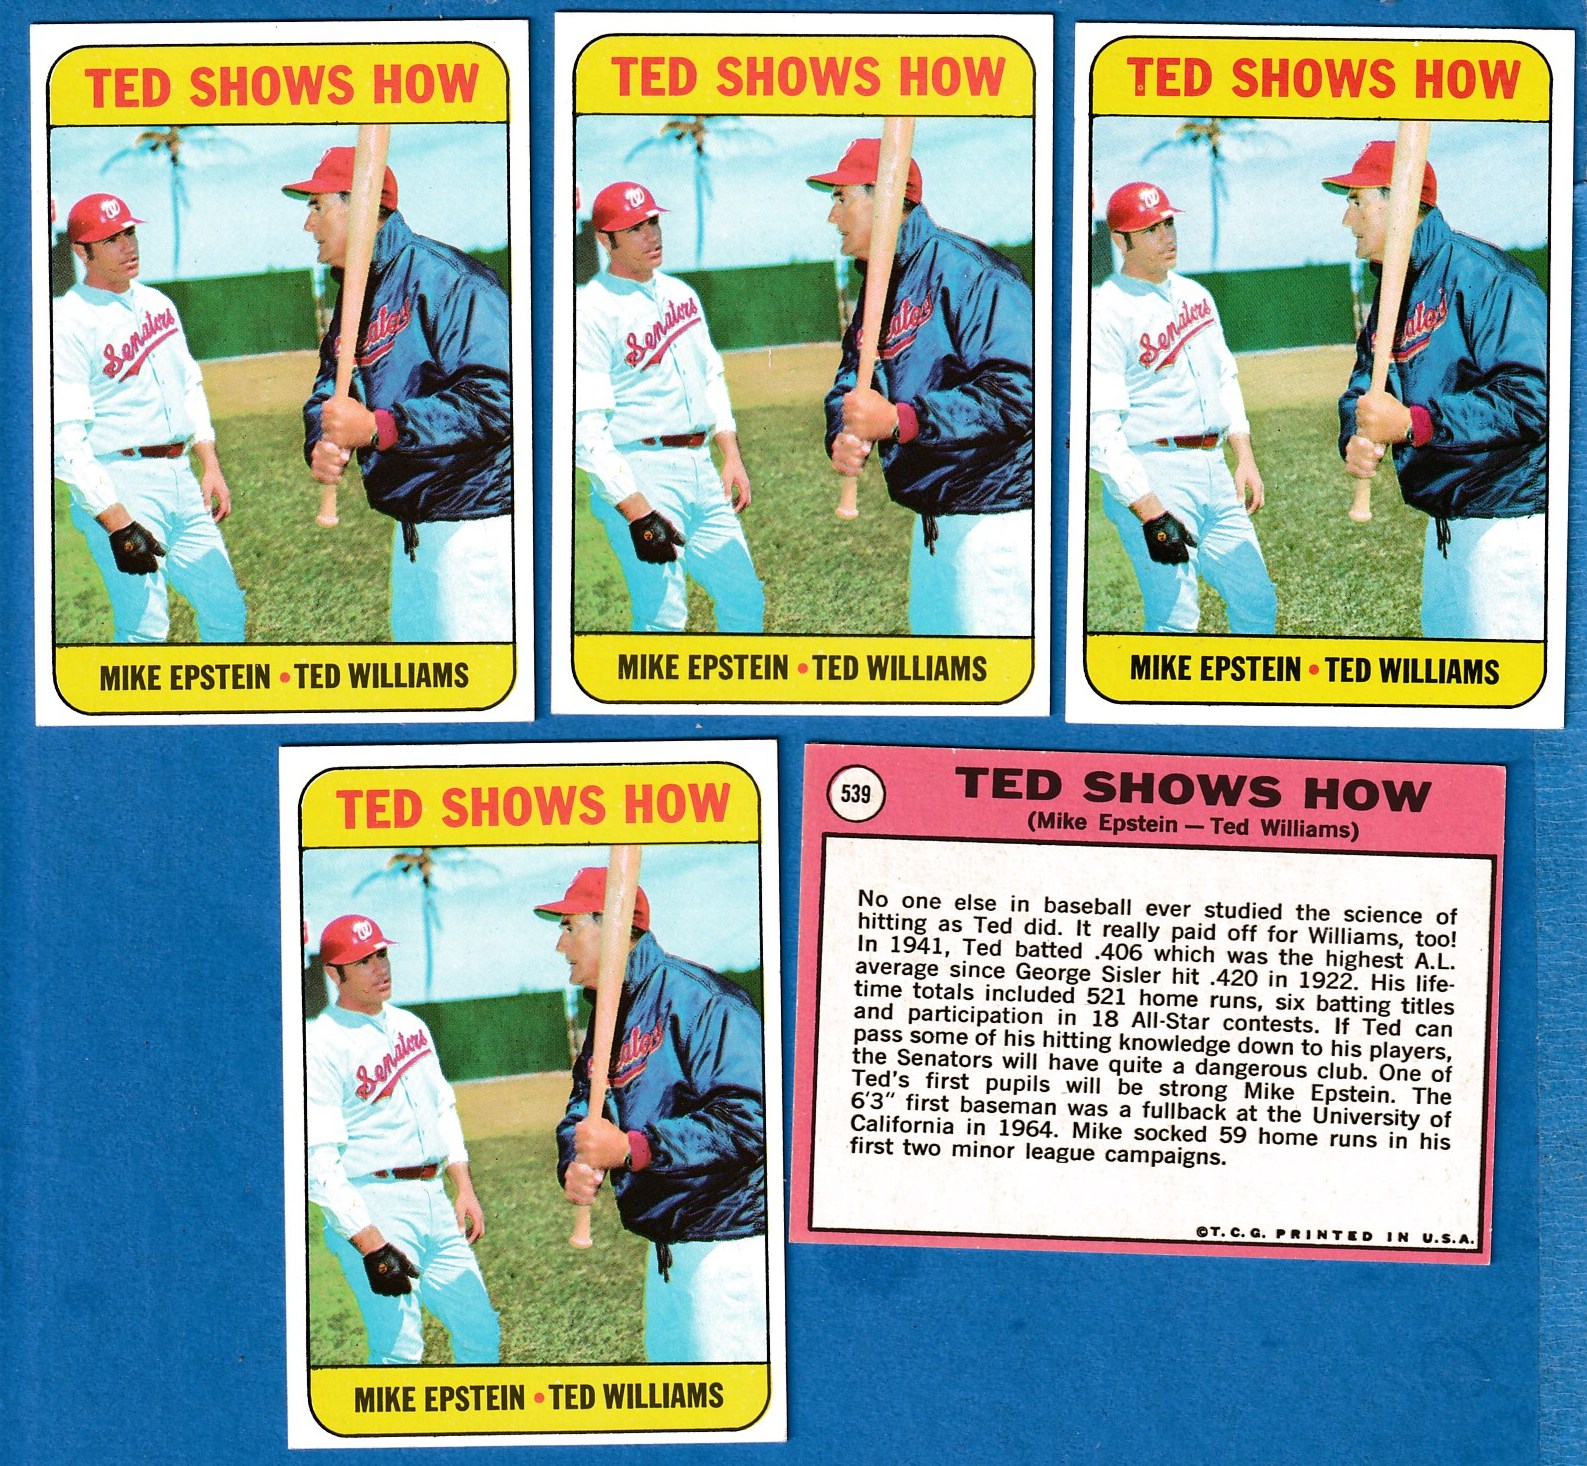 1969 Topps #539 Ted Williams 'Ted Shows How' (with Mike Epstein) (Senato Baseball cards value